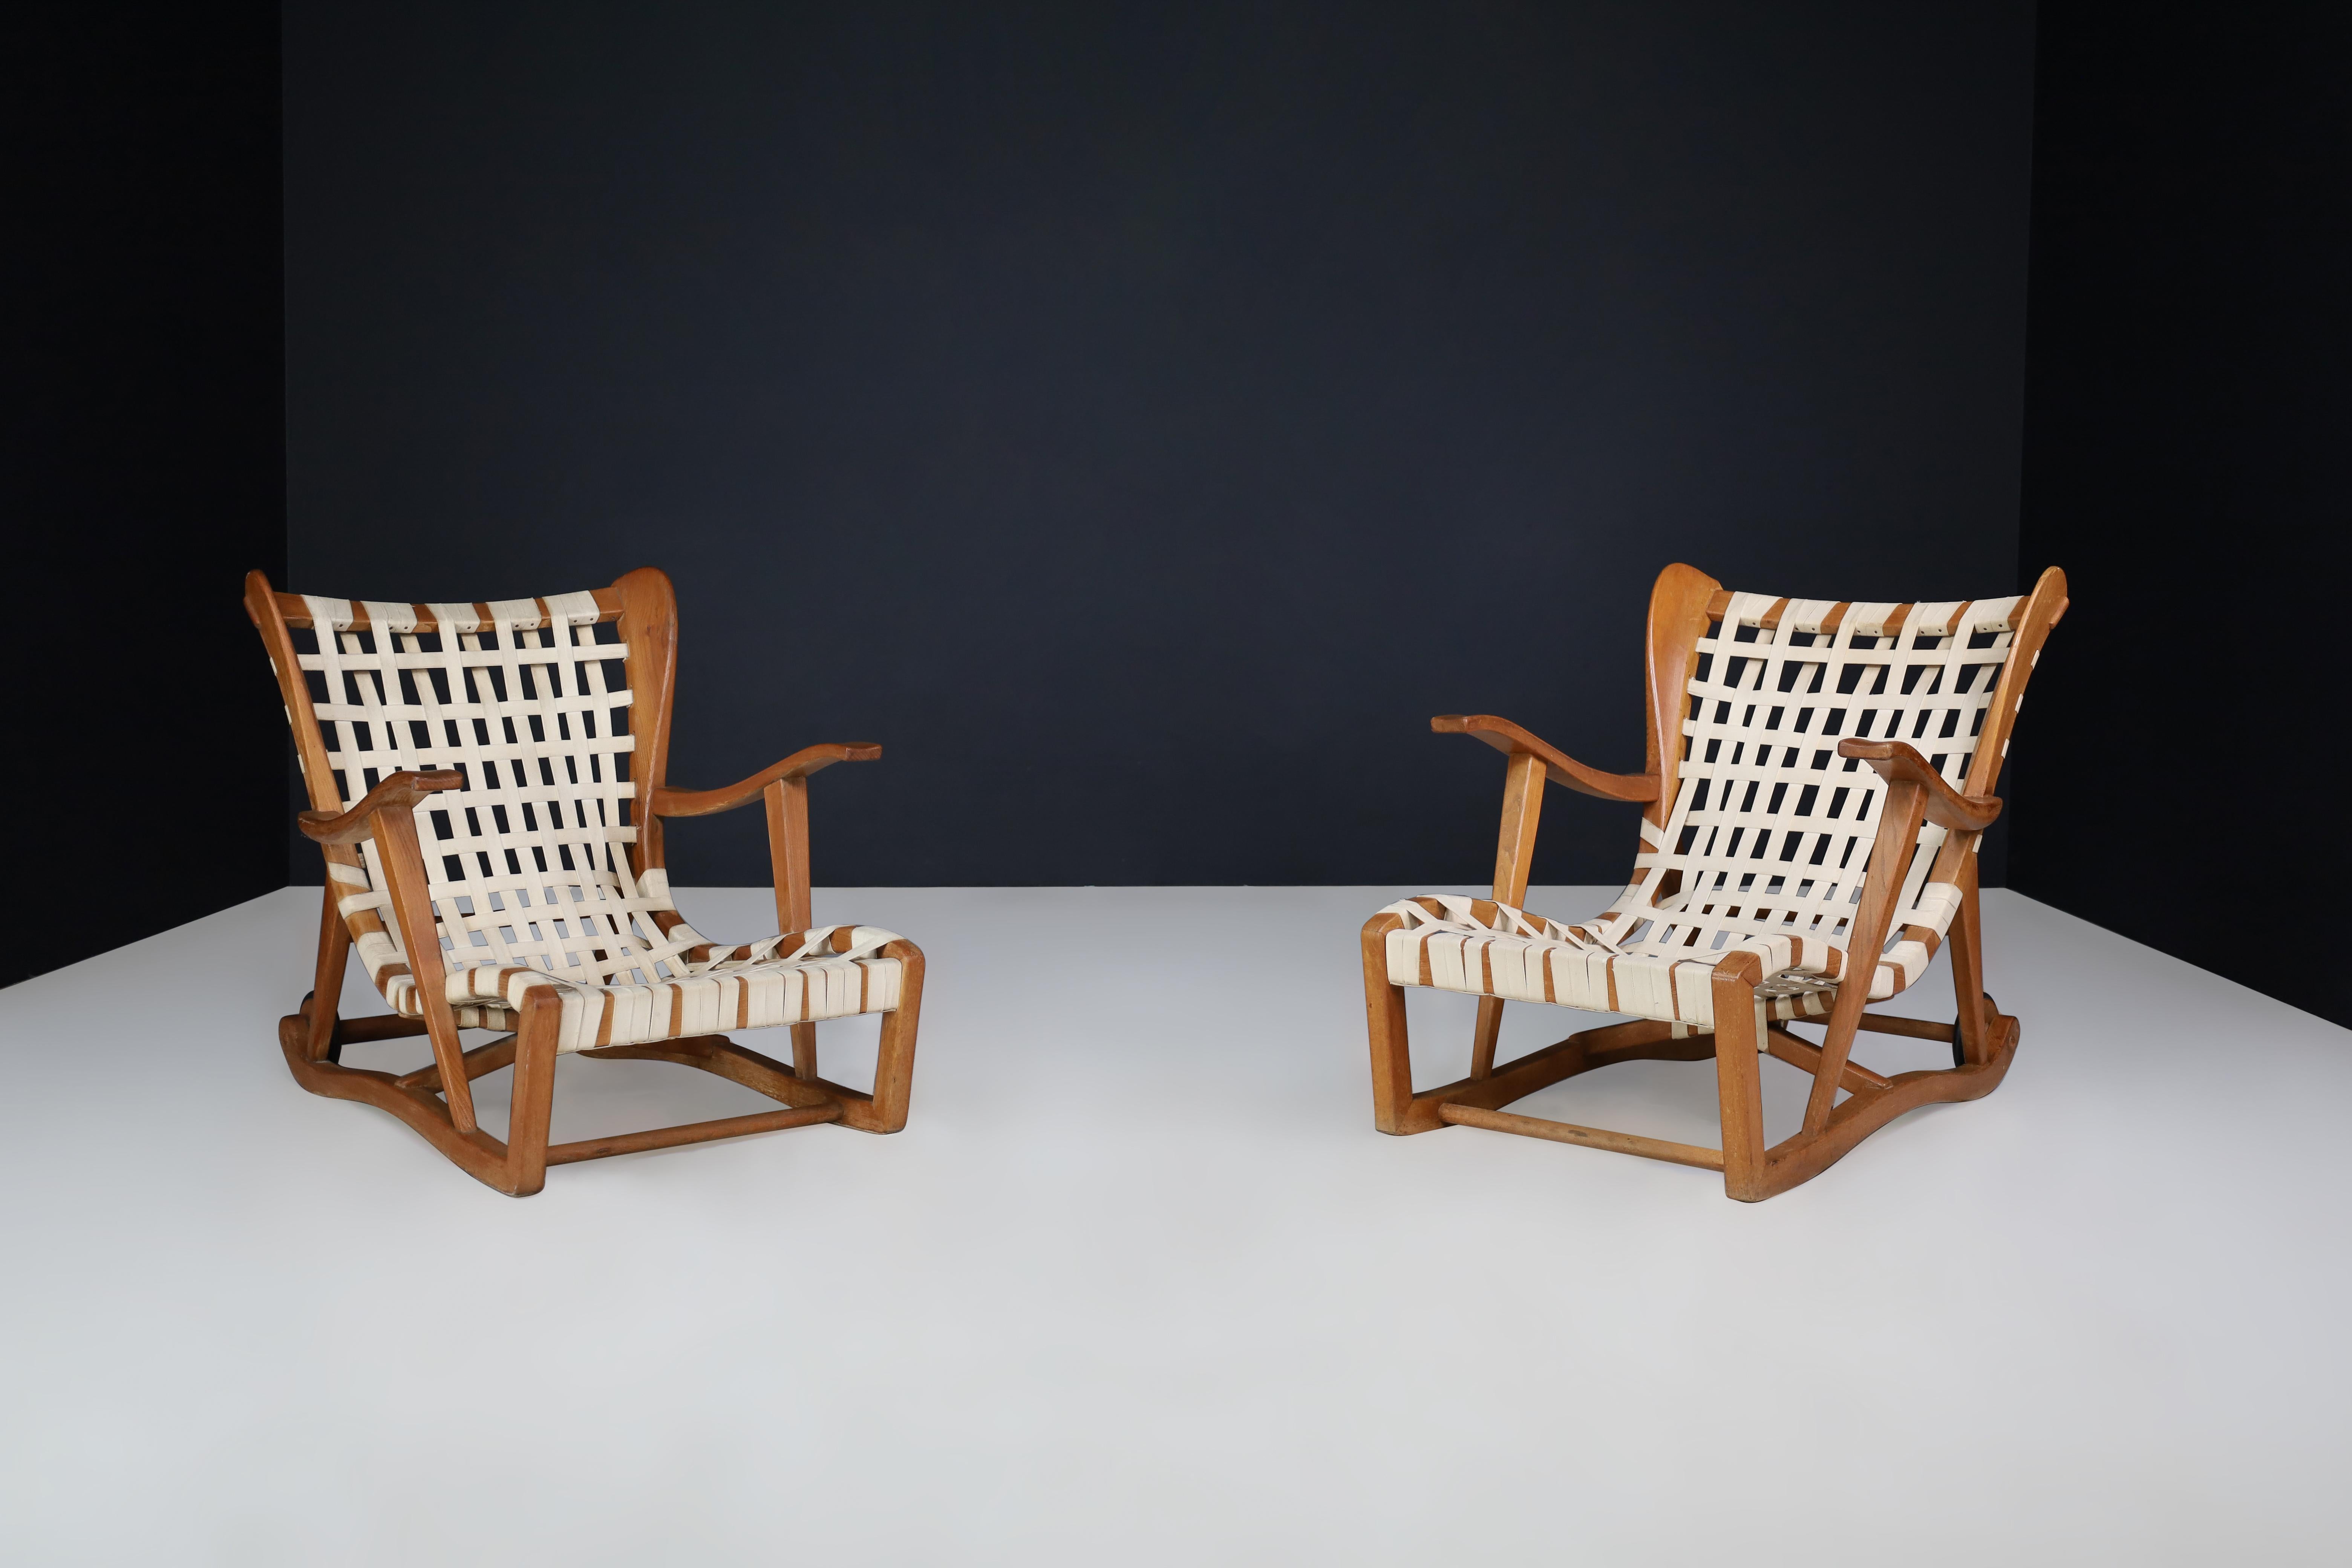 Sculptural oak Lounge chairs by Guglielmo Pecorini, Italy, the 1950s   For Sale 2